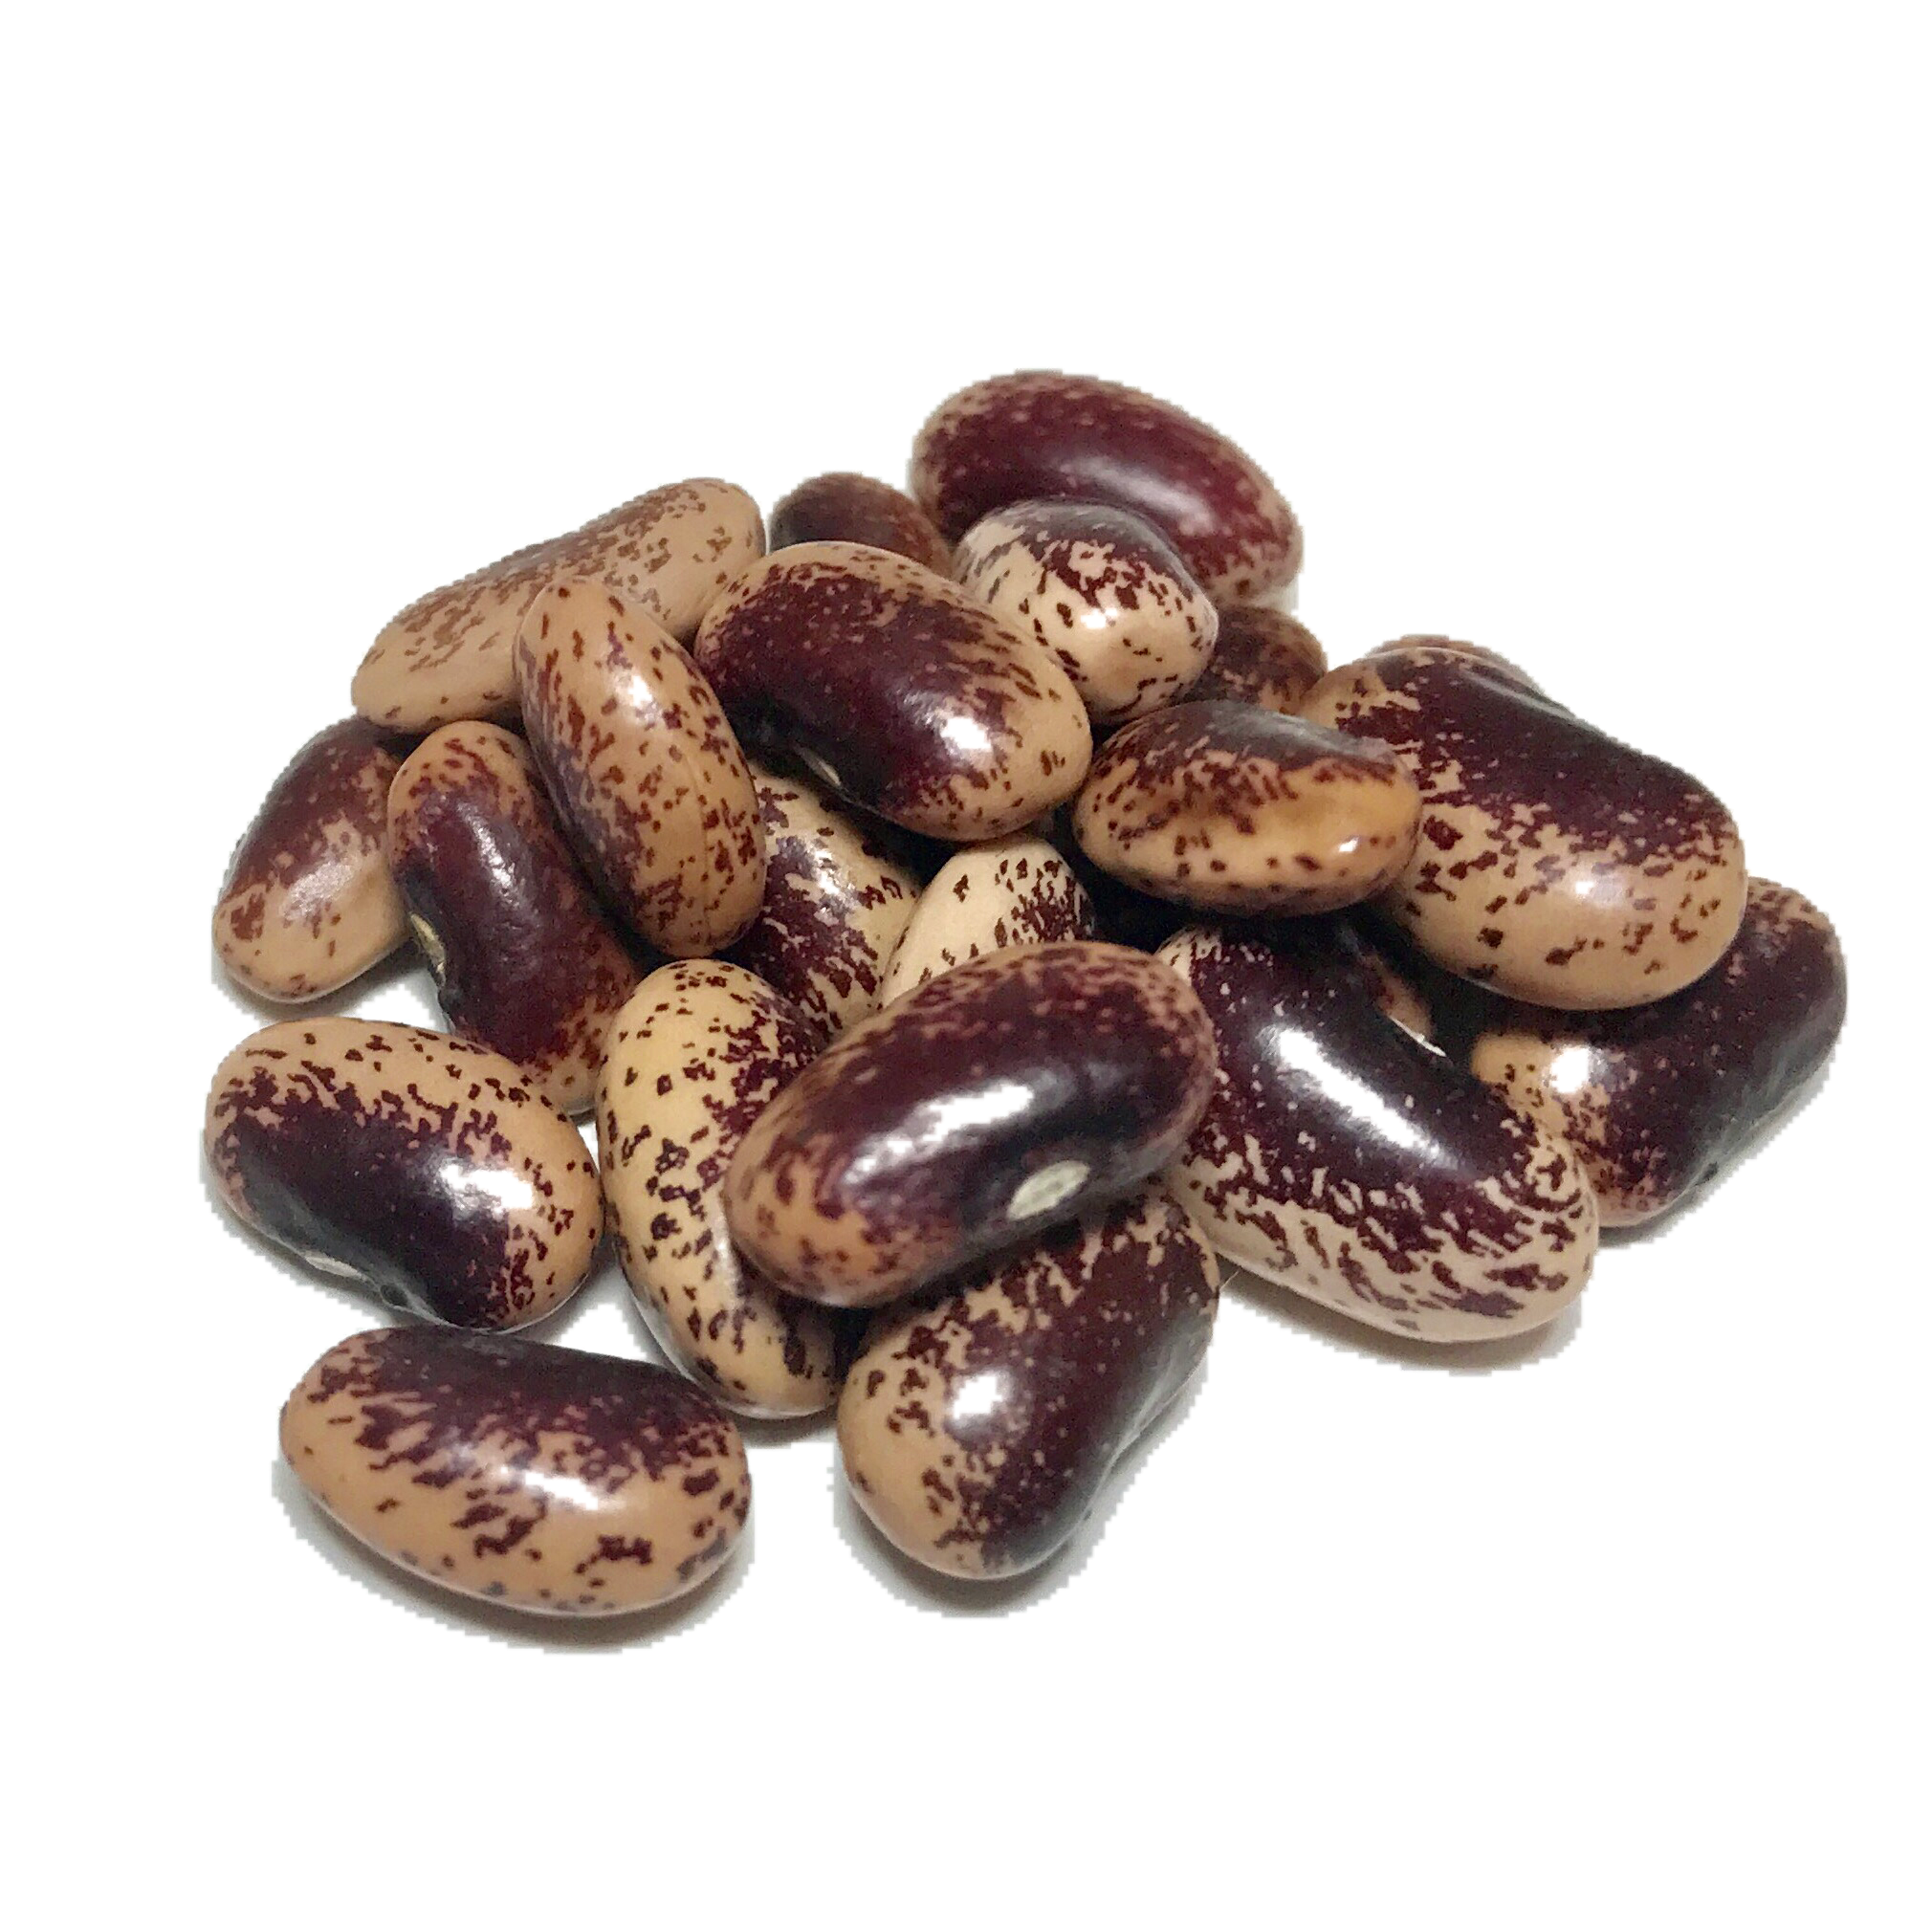 Painted Lady Heirloom Dry Beans